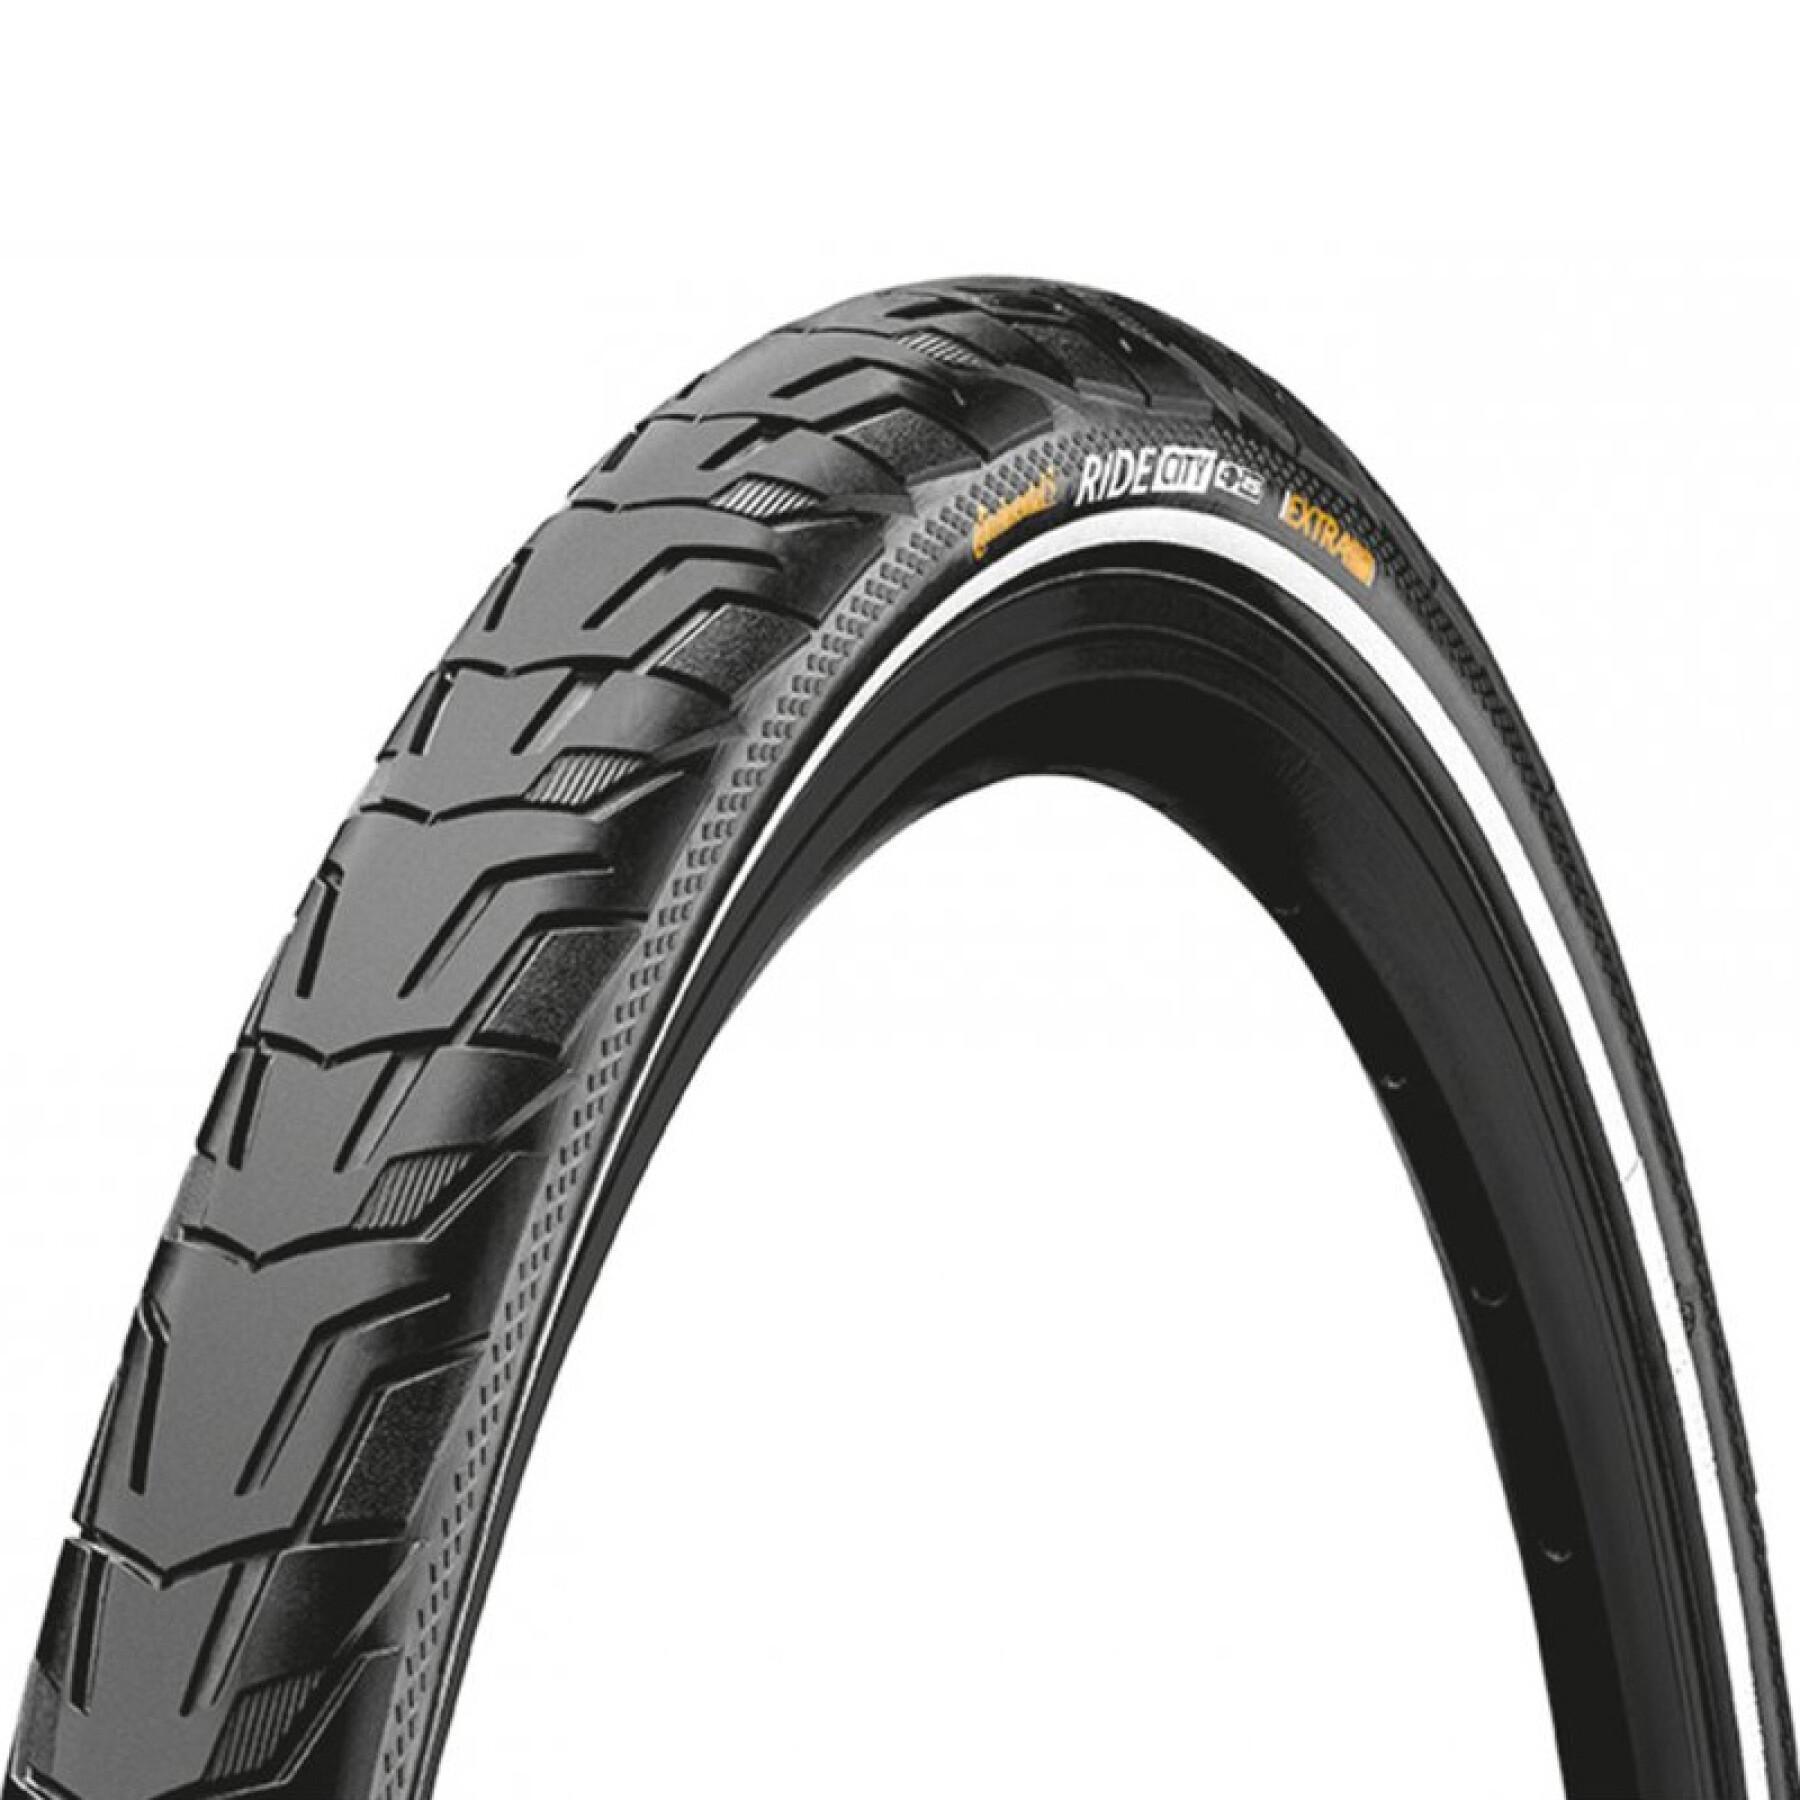 Band Continental Ride City 28x175 Extrapuncture